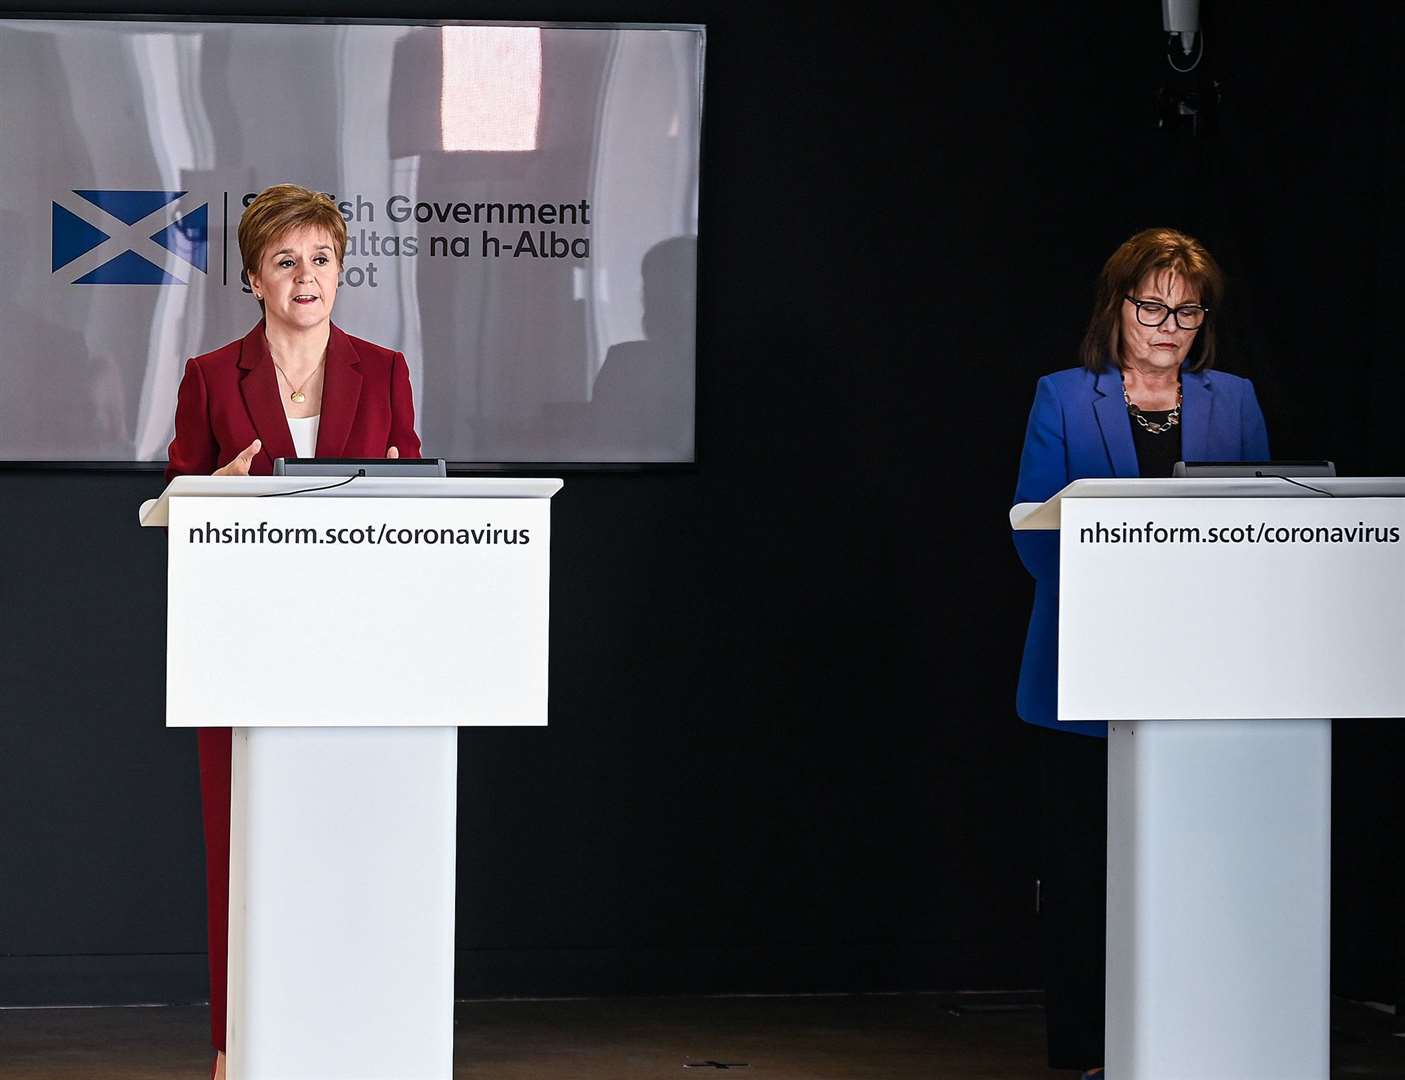 First Minister Nicola Sturgeon (left) speaking at a coronavirus briefing at St Andrews House in Edinburgh with health secretary Jeane Freeman. Photo credit: Jeff J Mitchell/PA Wire